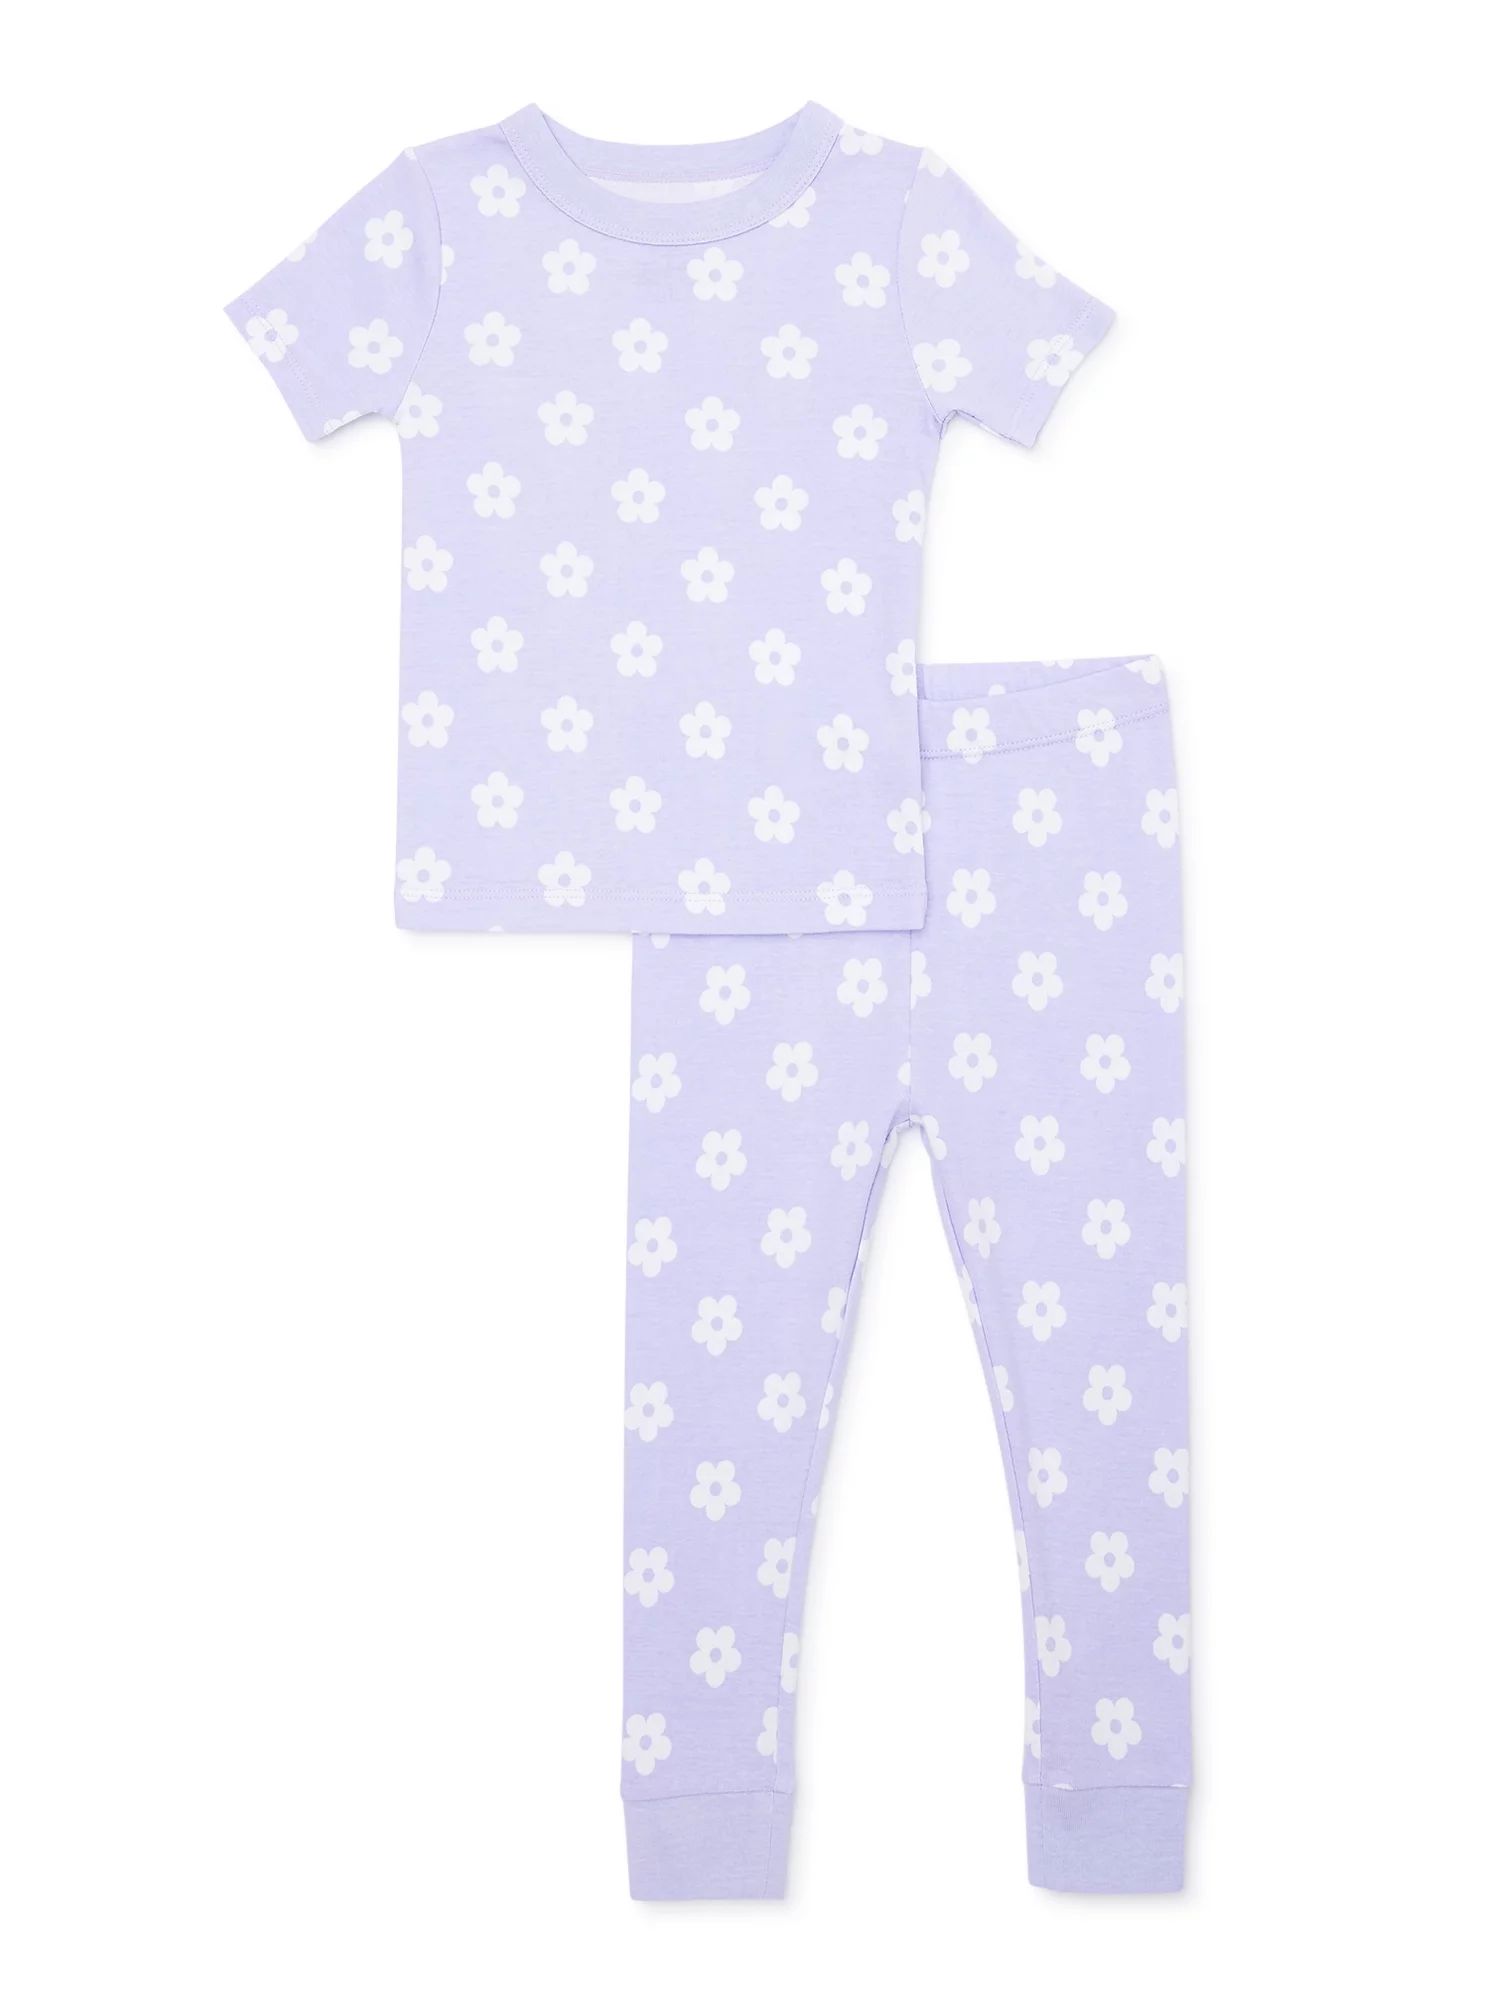 Wonder Nation Baby and Toddler Girls Cotton Tight Fit Top and Pants, 2-Piece Sleep Set, Sizes 12M... | Walmart (US)